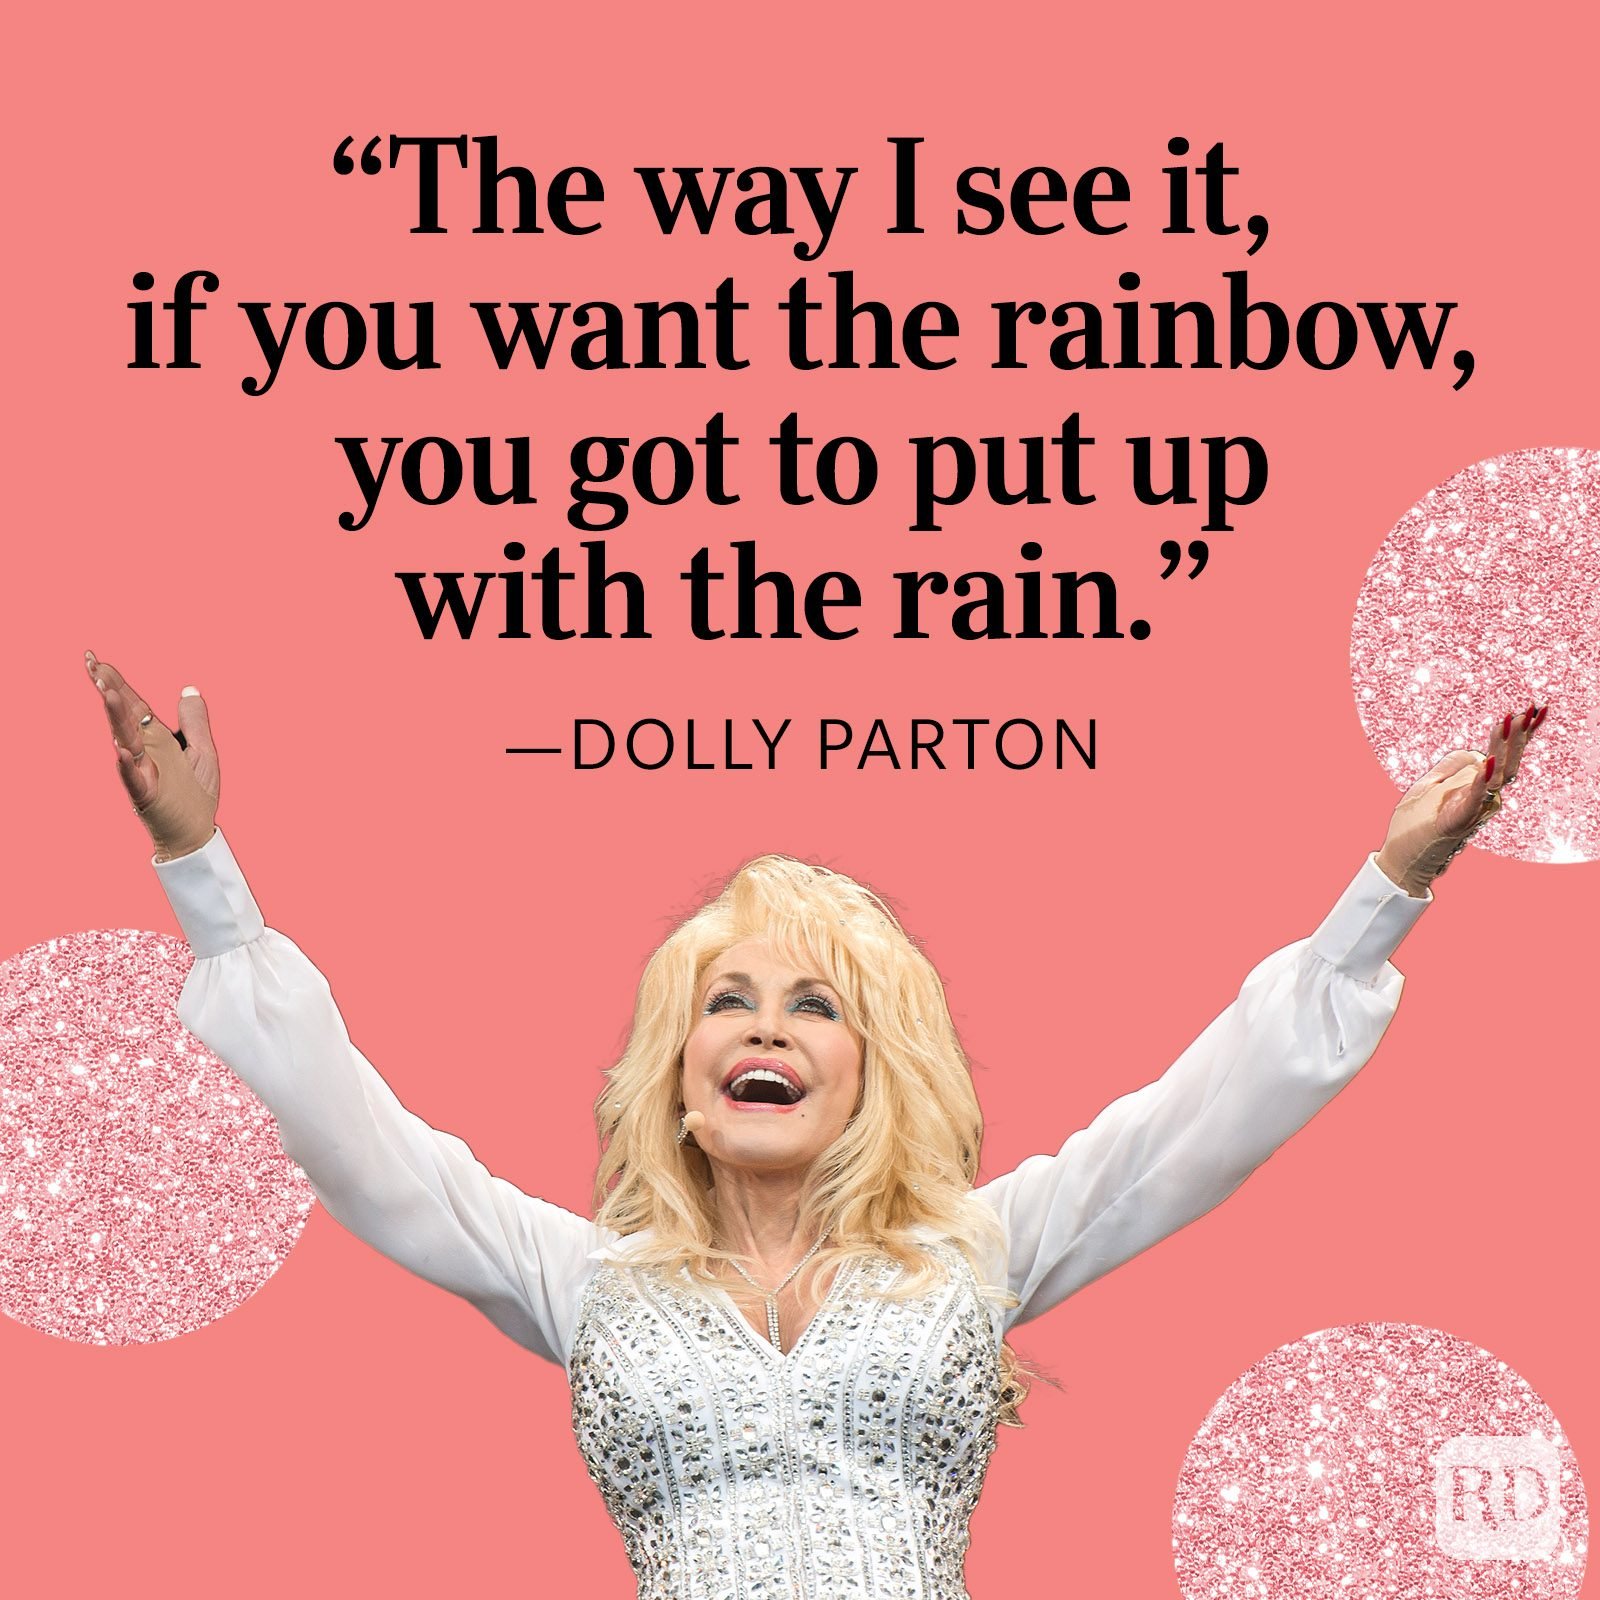 Dolly Parton Quotes: Her Funniest and